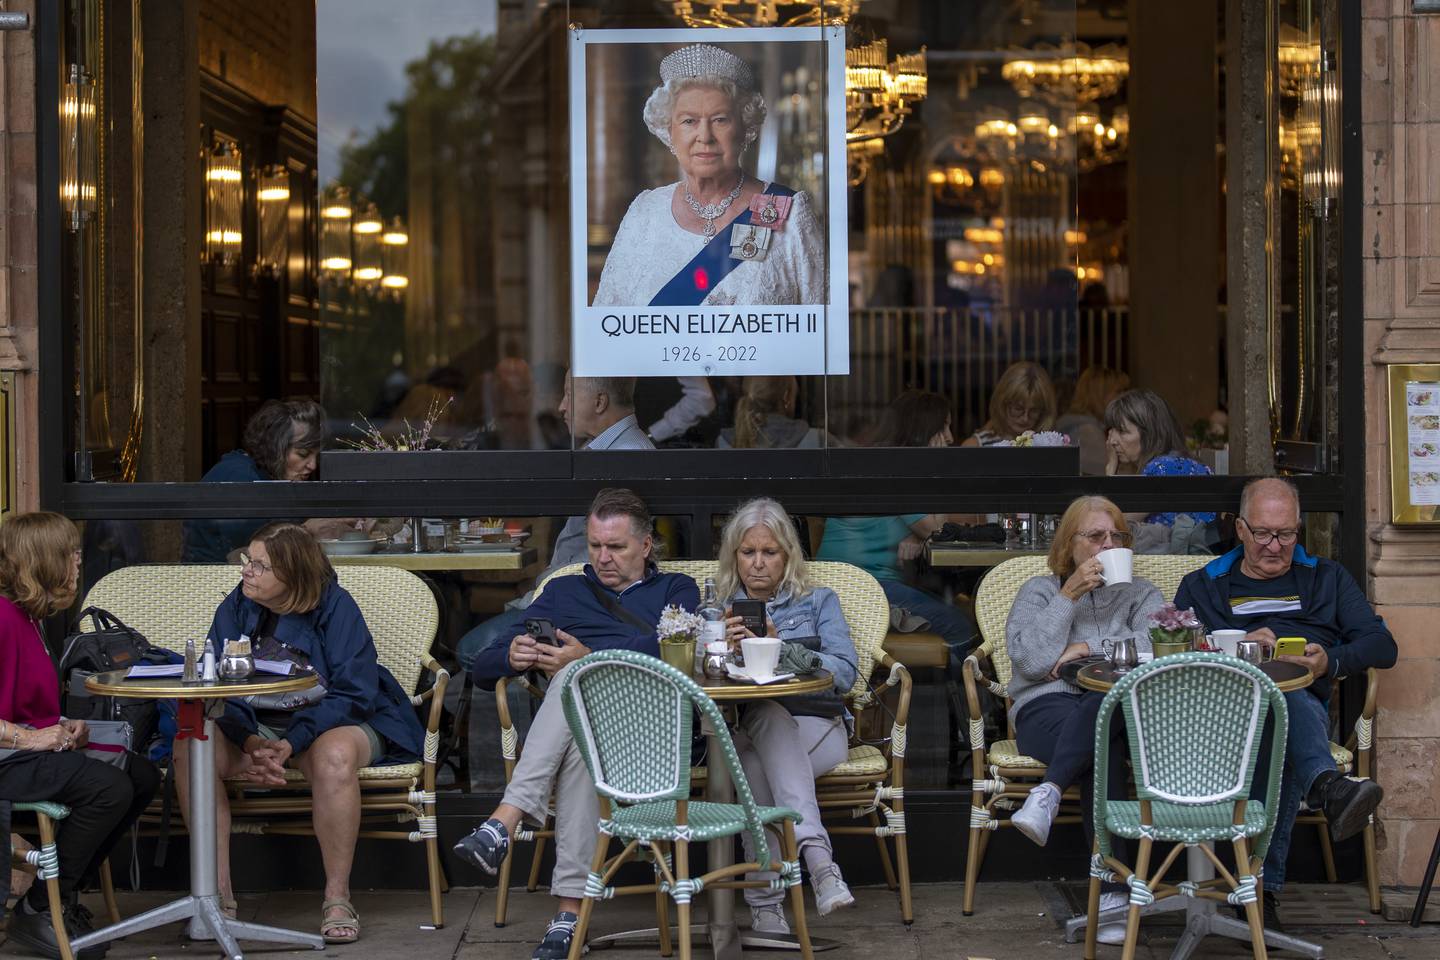 London's cafes, restaurants and hotels are experiencing a much-needed boom, with visitors flocking to the UK capital to pay tribute. AP